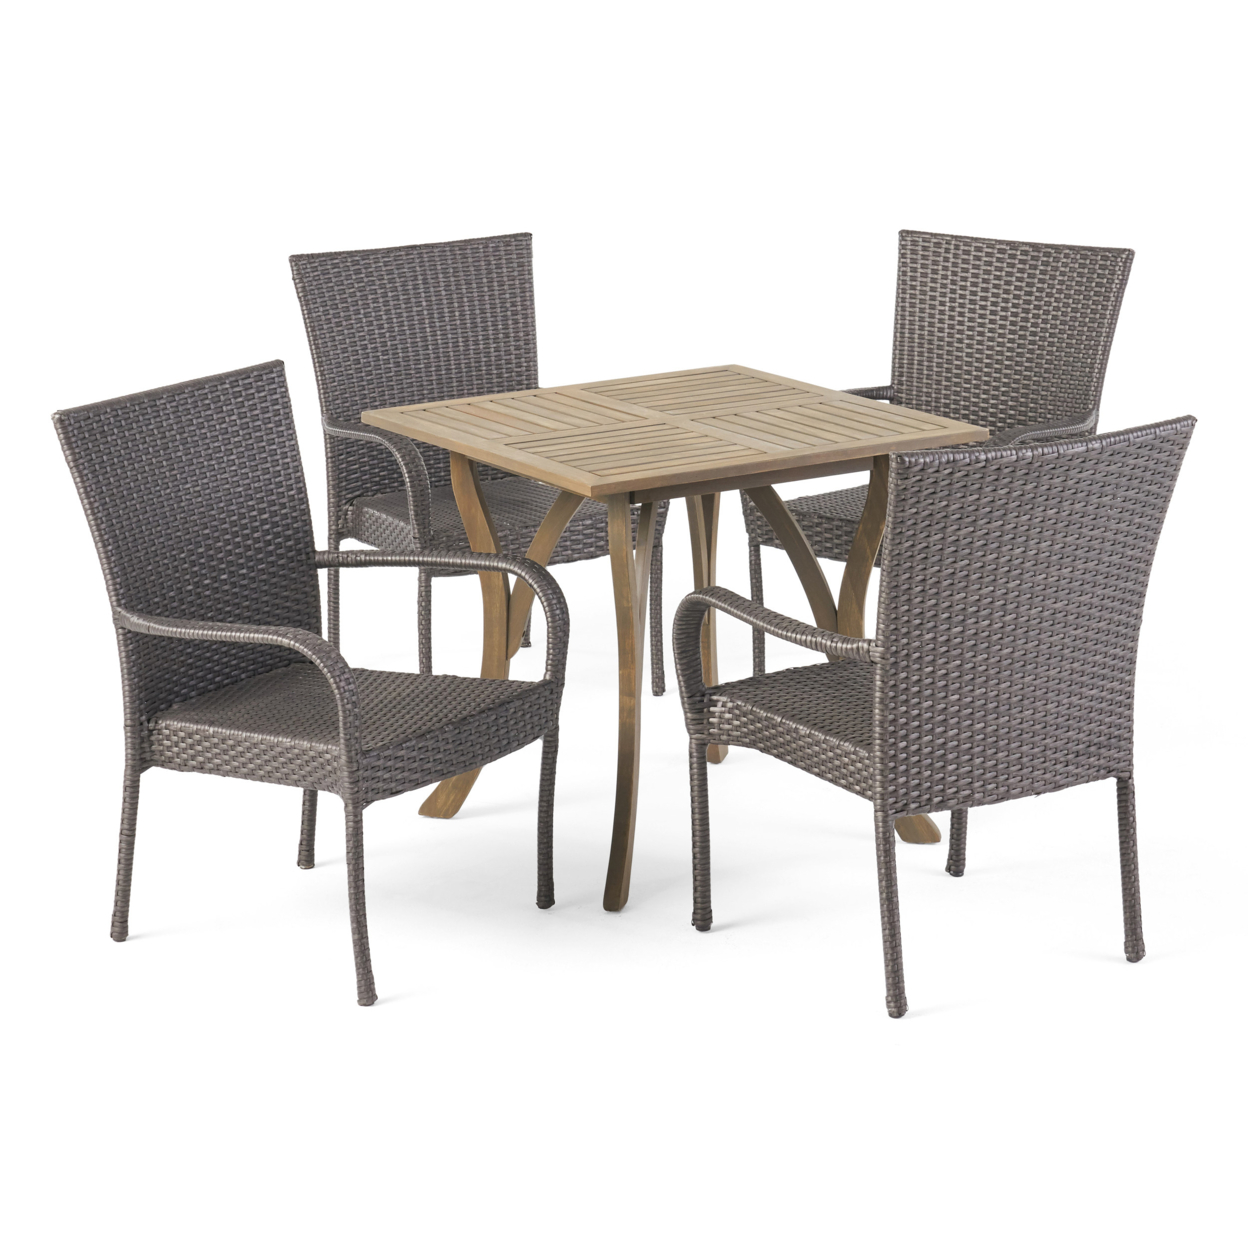 Benson Outdoor 5 Piece Wood And Wicker Square Dining Set, Gray And Gray